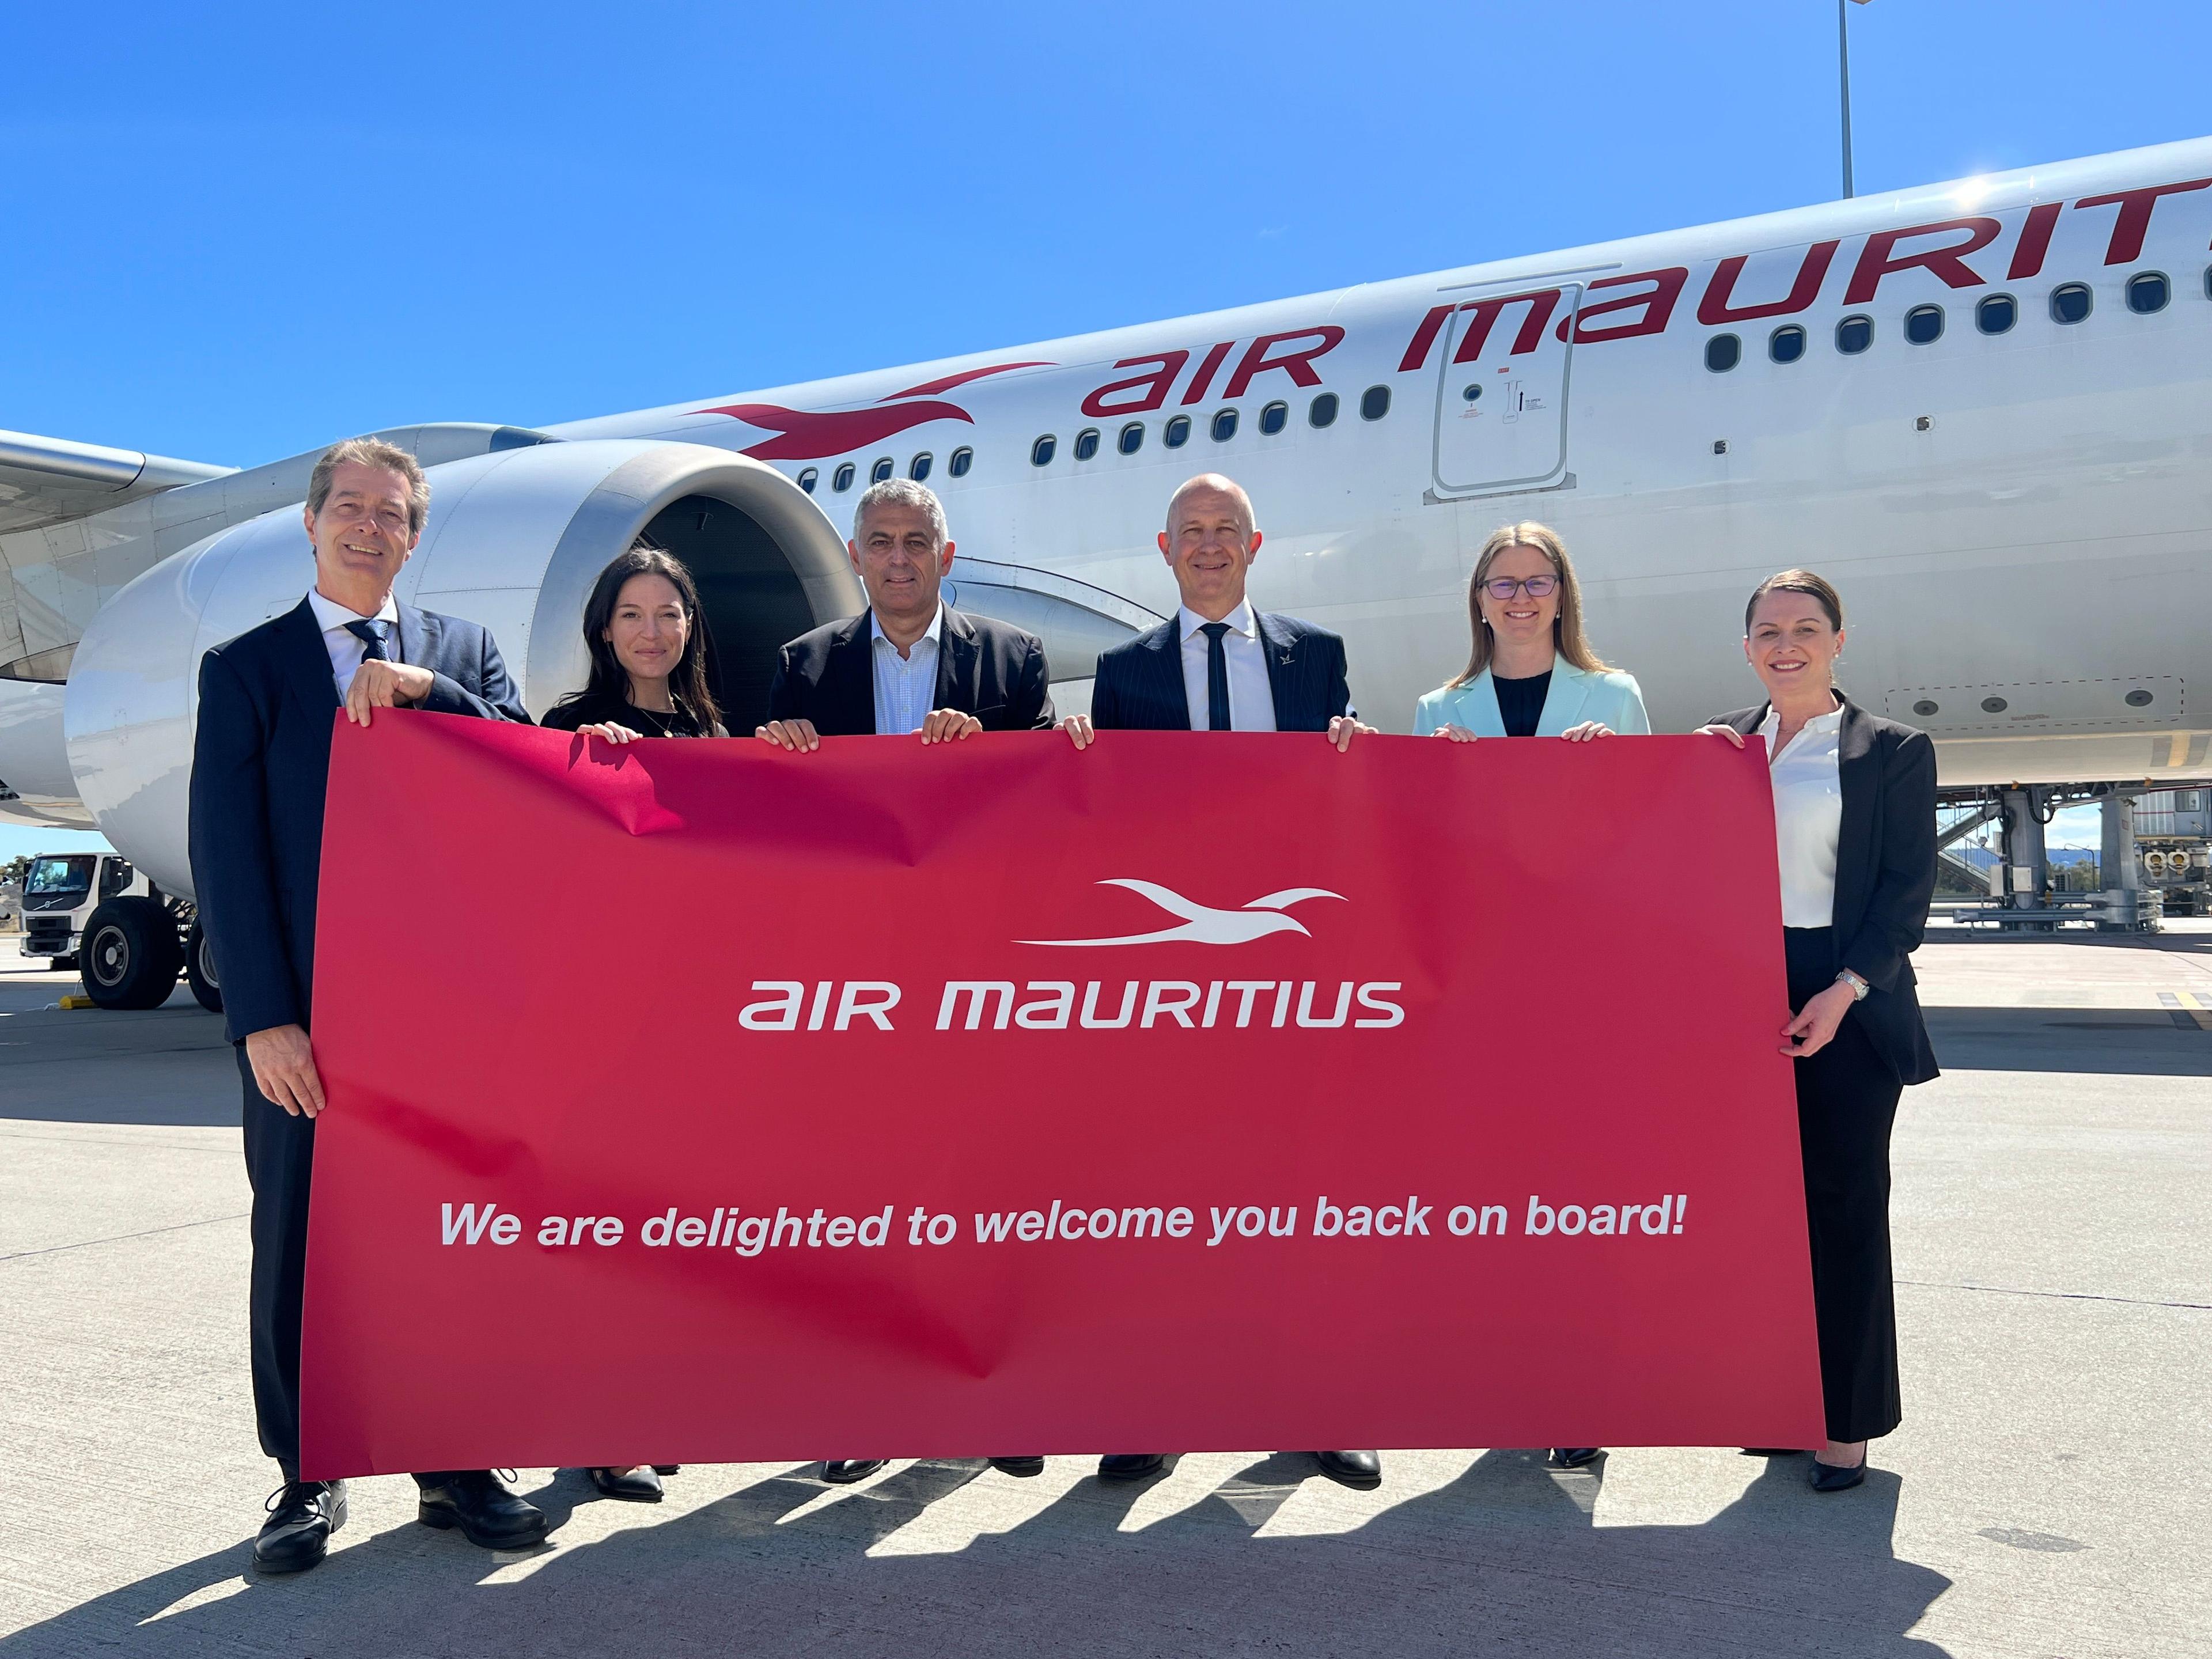 Cover image from Air Mauritius